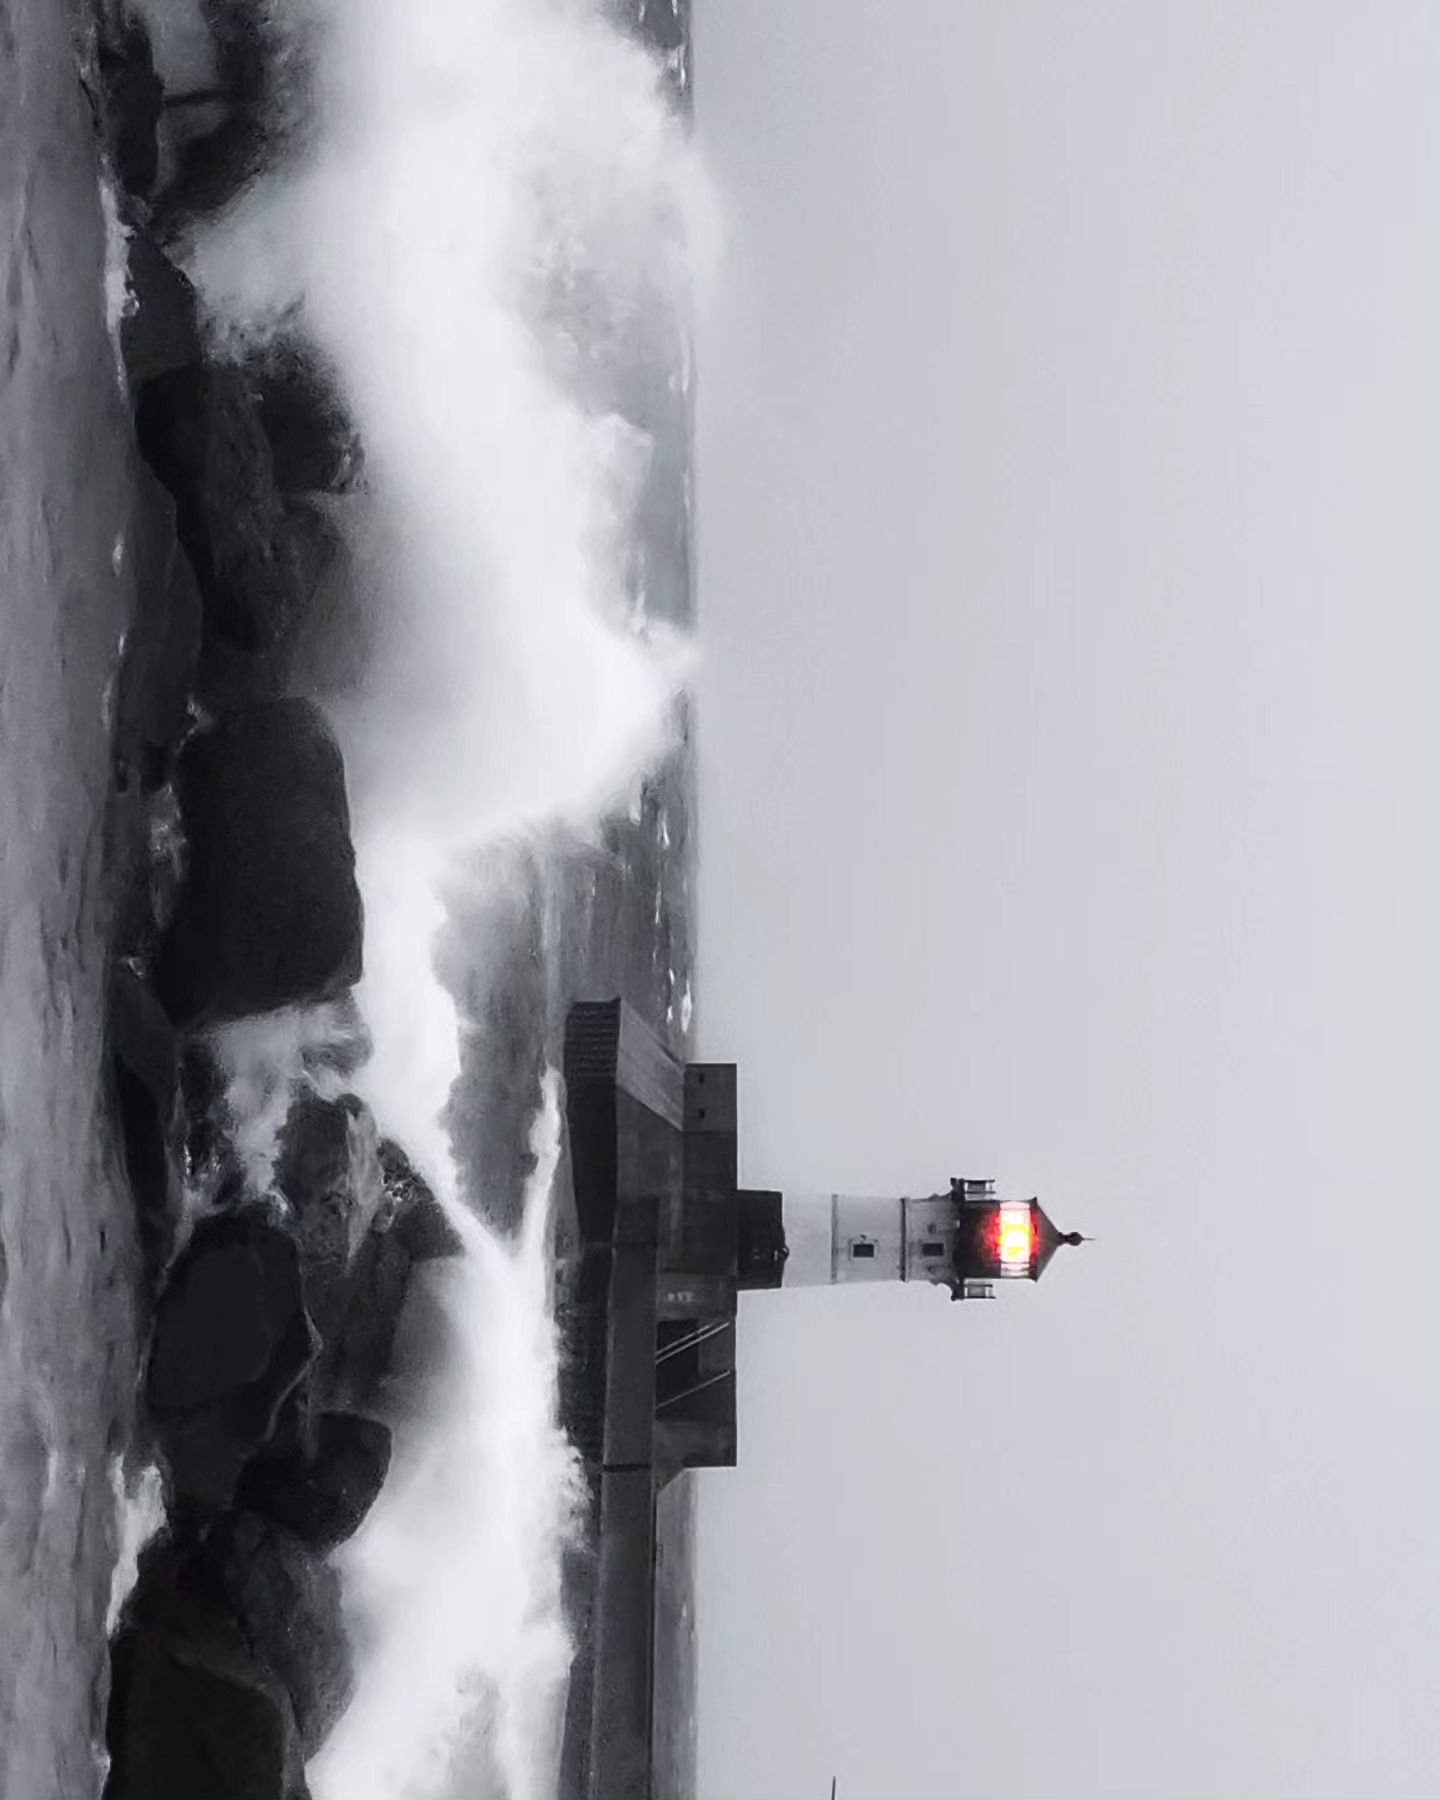 Just some fun wind edits.

#photography #photoediting #lighthouse #waves #red #light #bw #funday